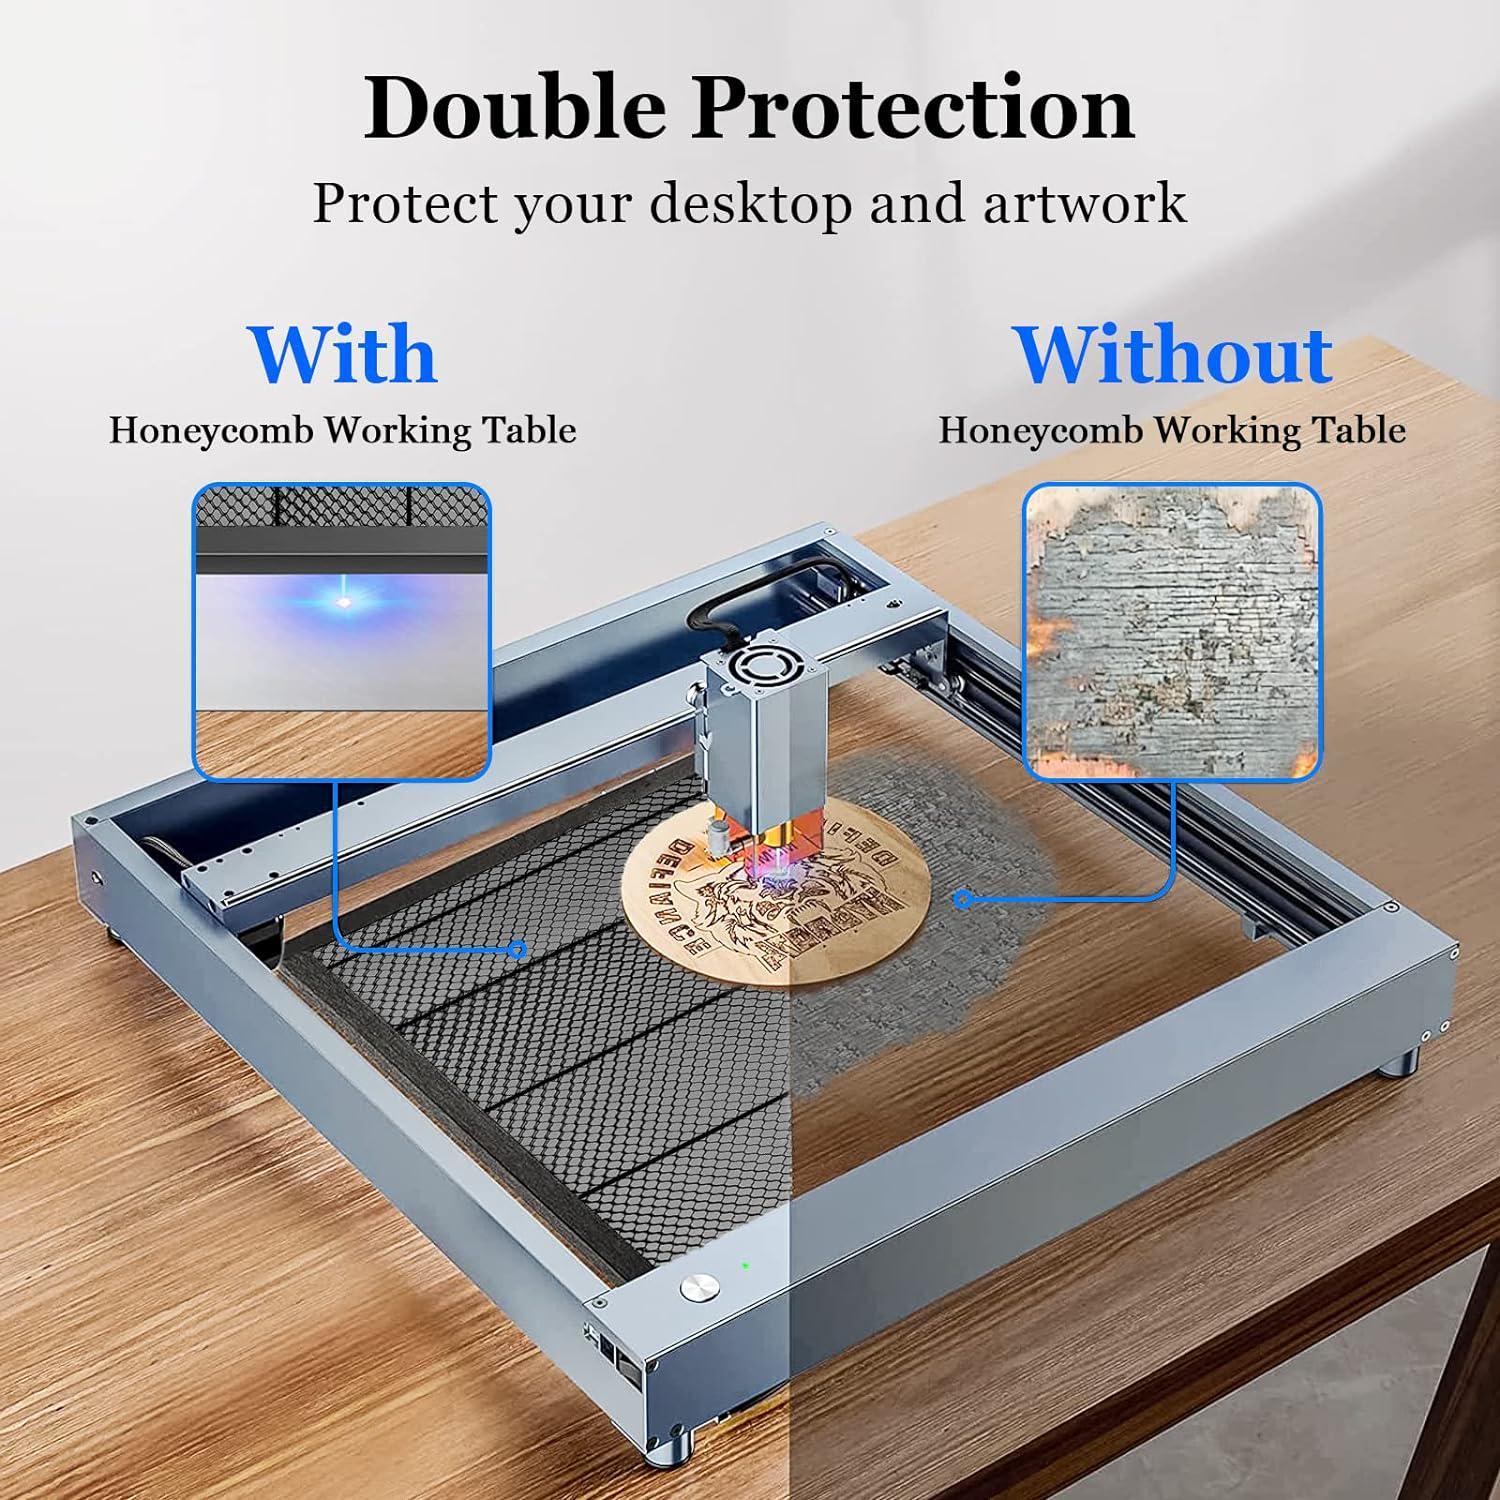 Honeycomb Working Table 400 x 400 x 22mm Honeycomb Laser Bed for Laser  Engravers